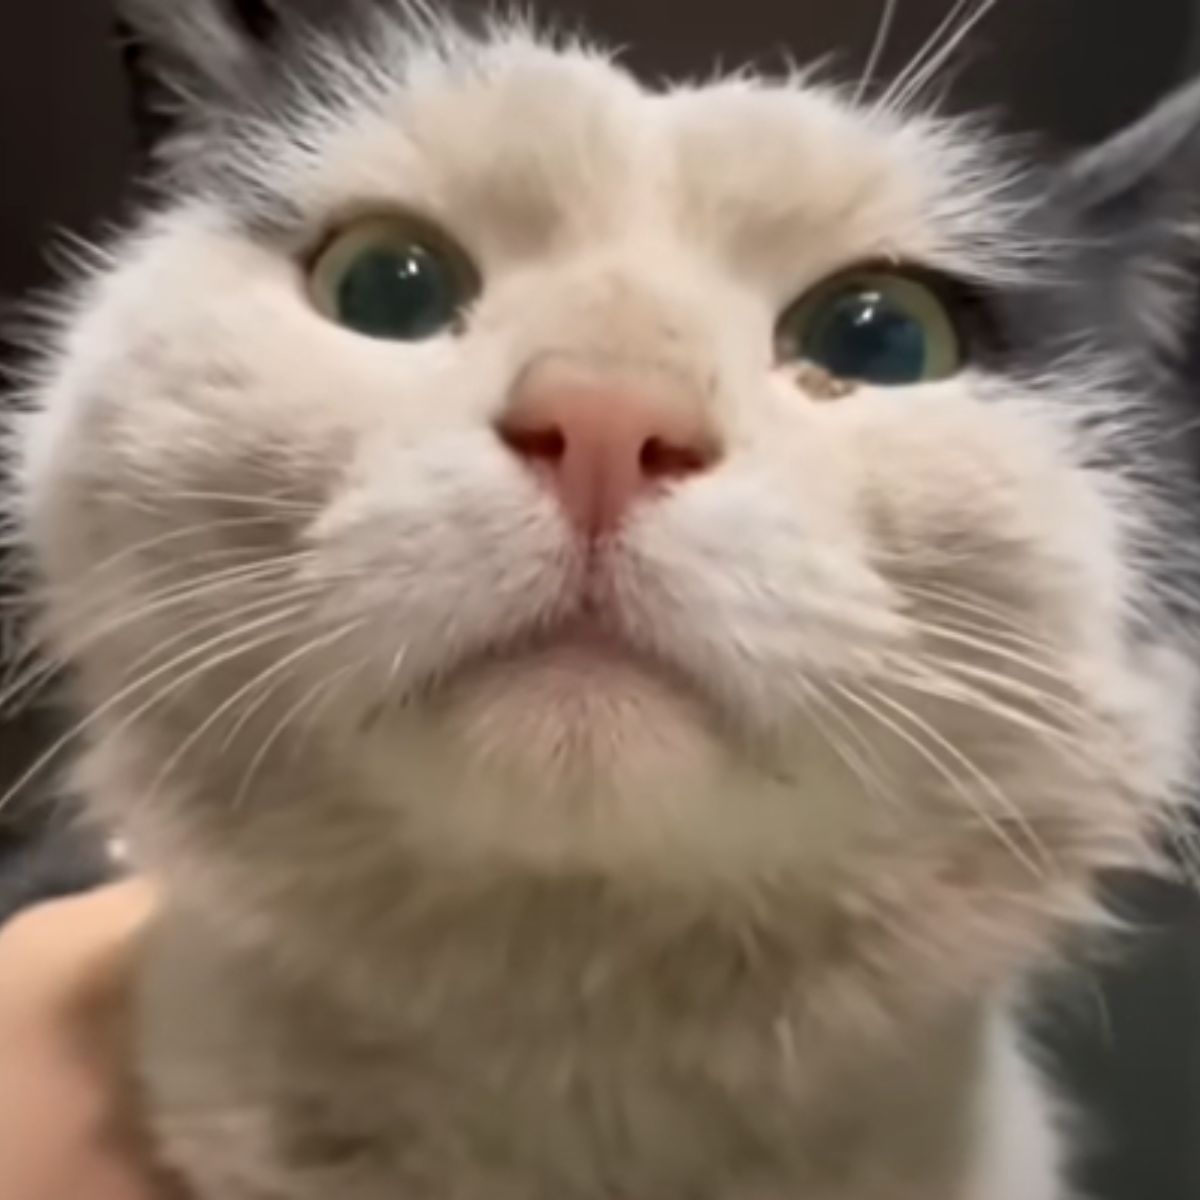 close-up photo of the rescued cat